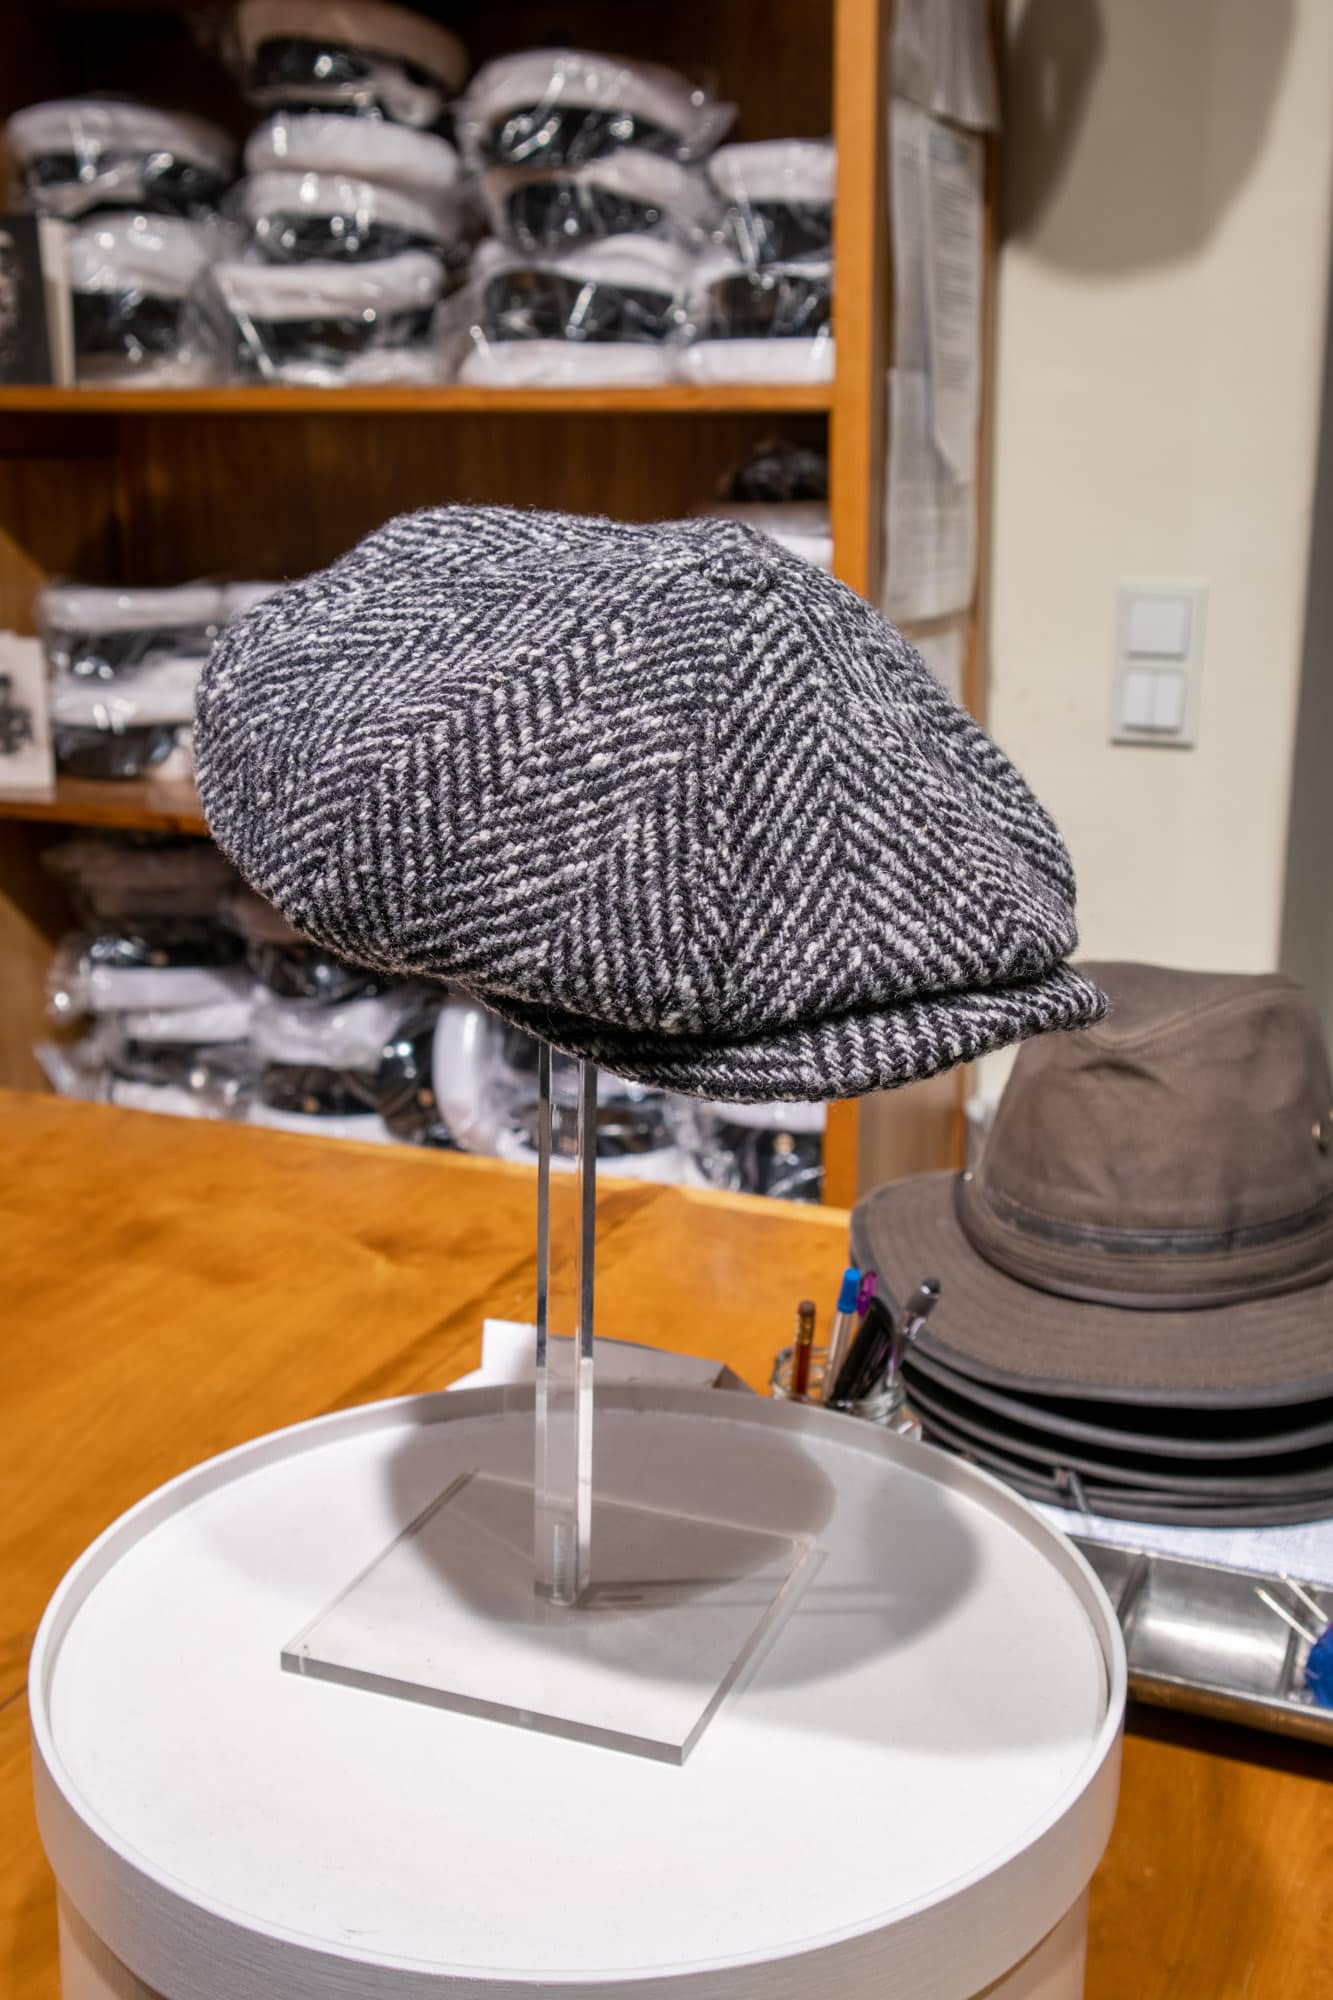 Collection of stylish men's hats of various types - hats, caps